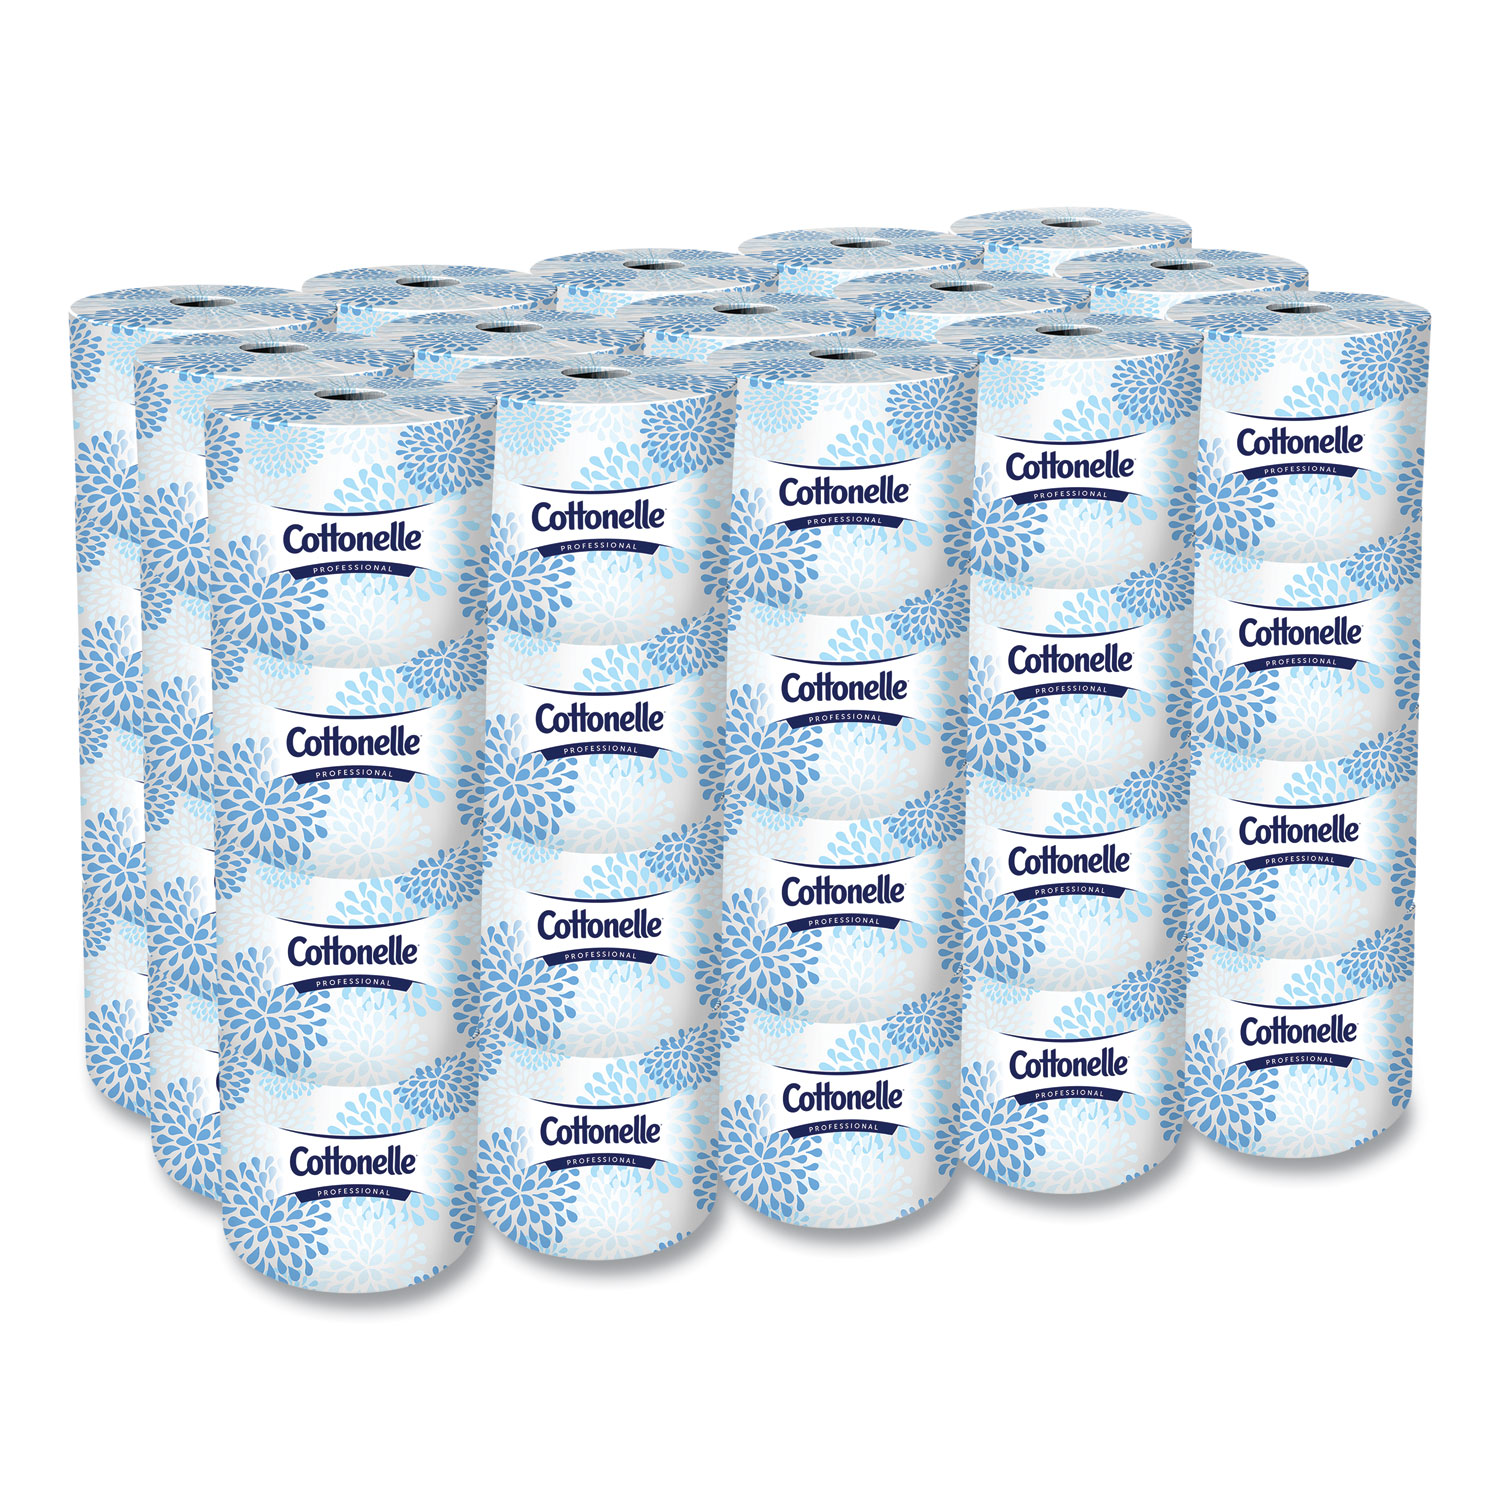 Cottonelle Professional Bulk Toilet Paper for Business (17713), Standard  Toilet Paper Rolls, 2-PLY, White, 60 Rolls / Case, 451 Sheets / Roll 